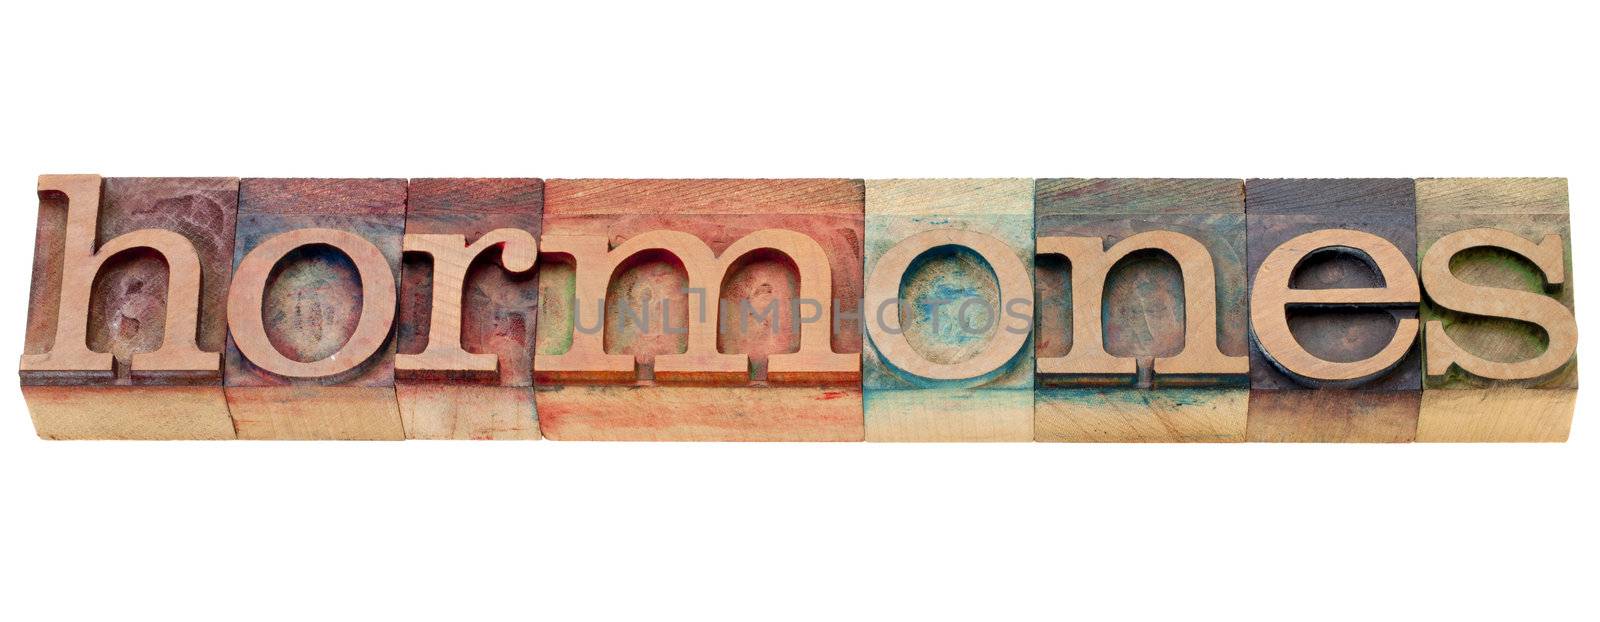 hormones -  health concept - isolated word in vintage wood letterpress printing blocks stained by color inks